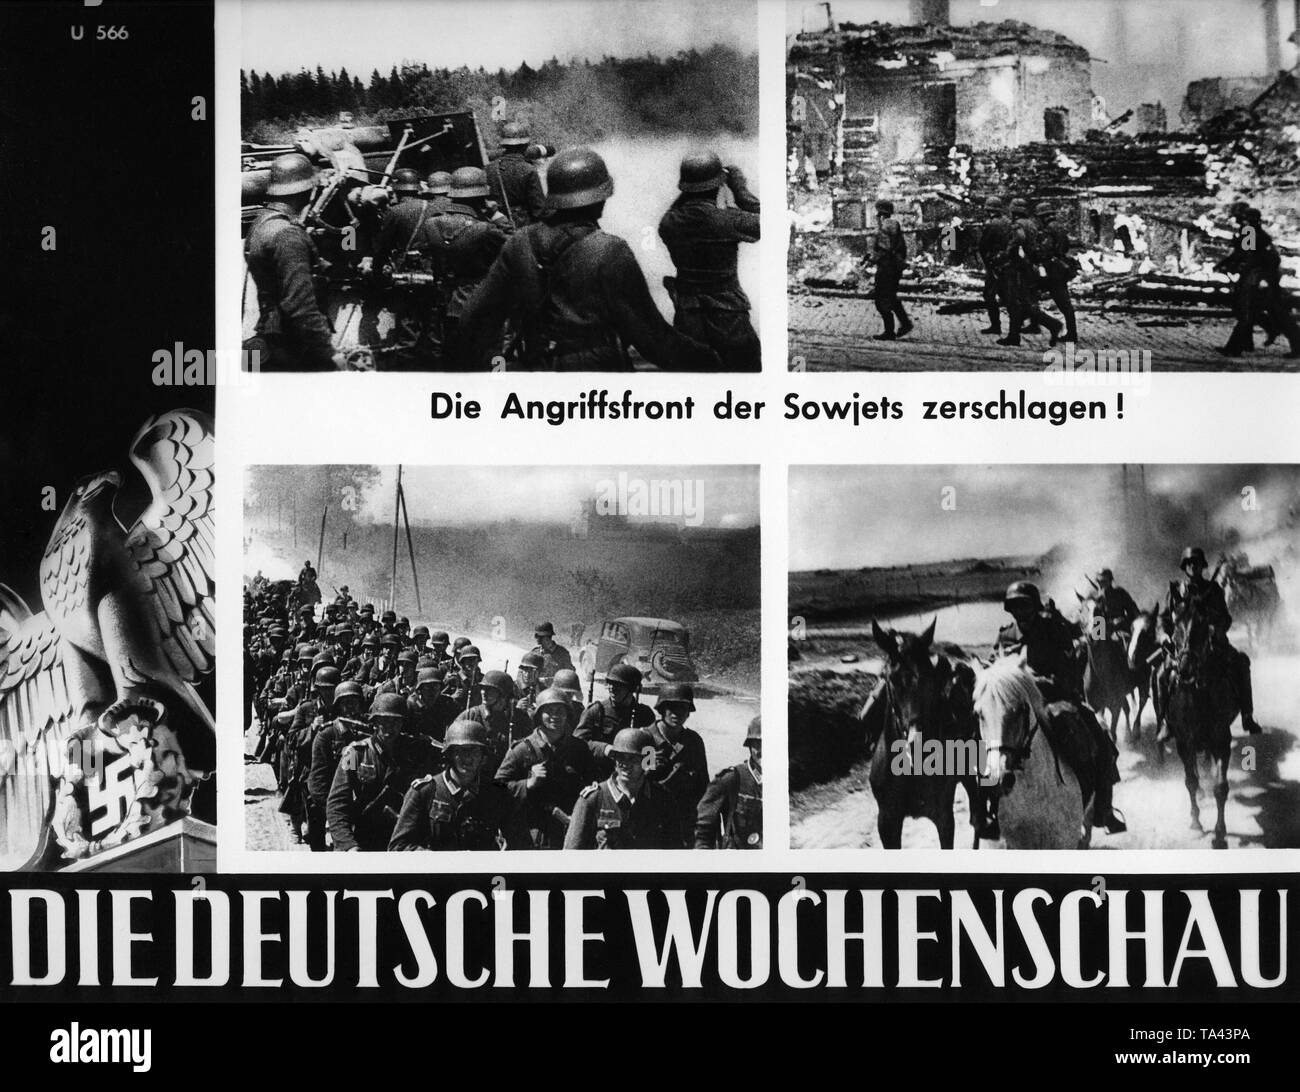 Pictures of the Deutsche Wochenschau at the beginning of the Russian campaign: German 8.8-cm Flak 18/36/37 in ground combat (left above), German infantry in a burning village (right above), German infantry on the march (left below), German cavalry on the march (right below). Stock Photo